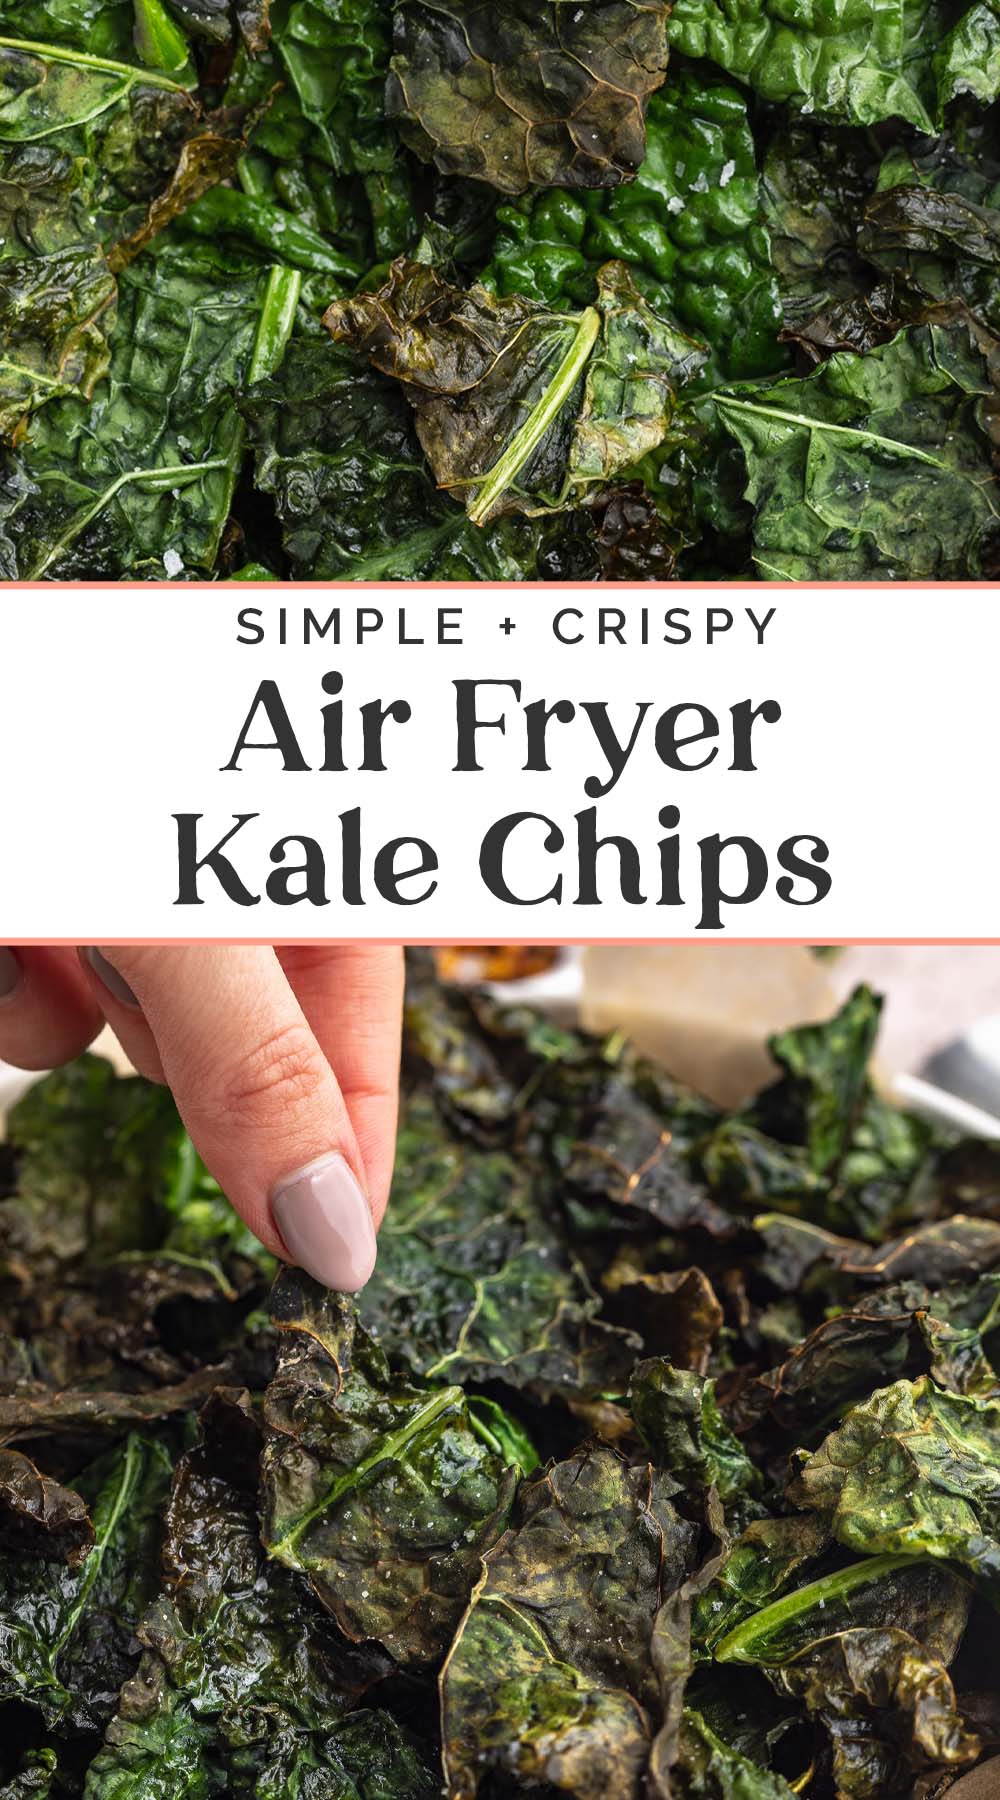 Pin graphic for air fryer kale chips.